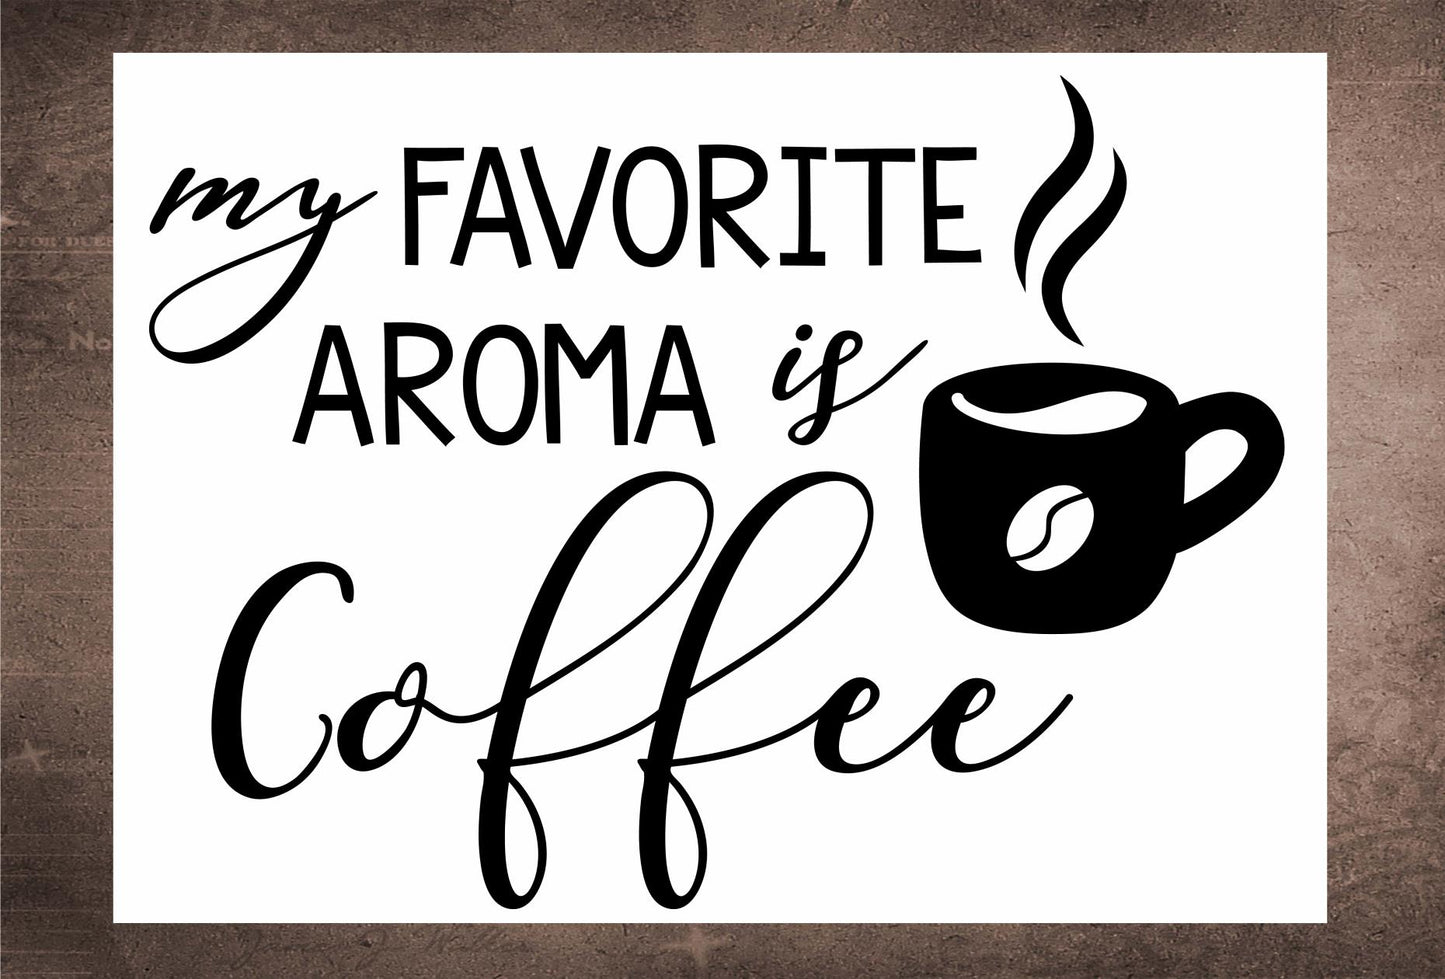 My Favorite Aroma Is Coffee Tier Tray Sign 4 x 6